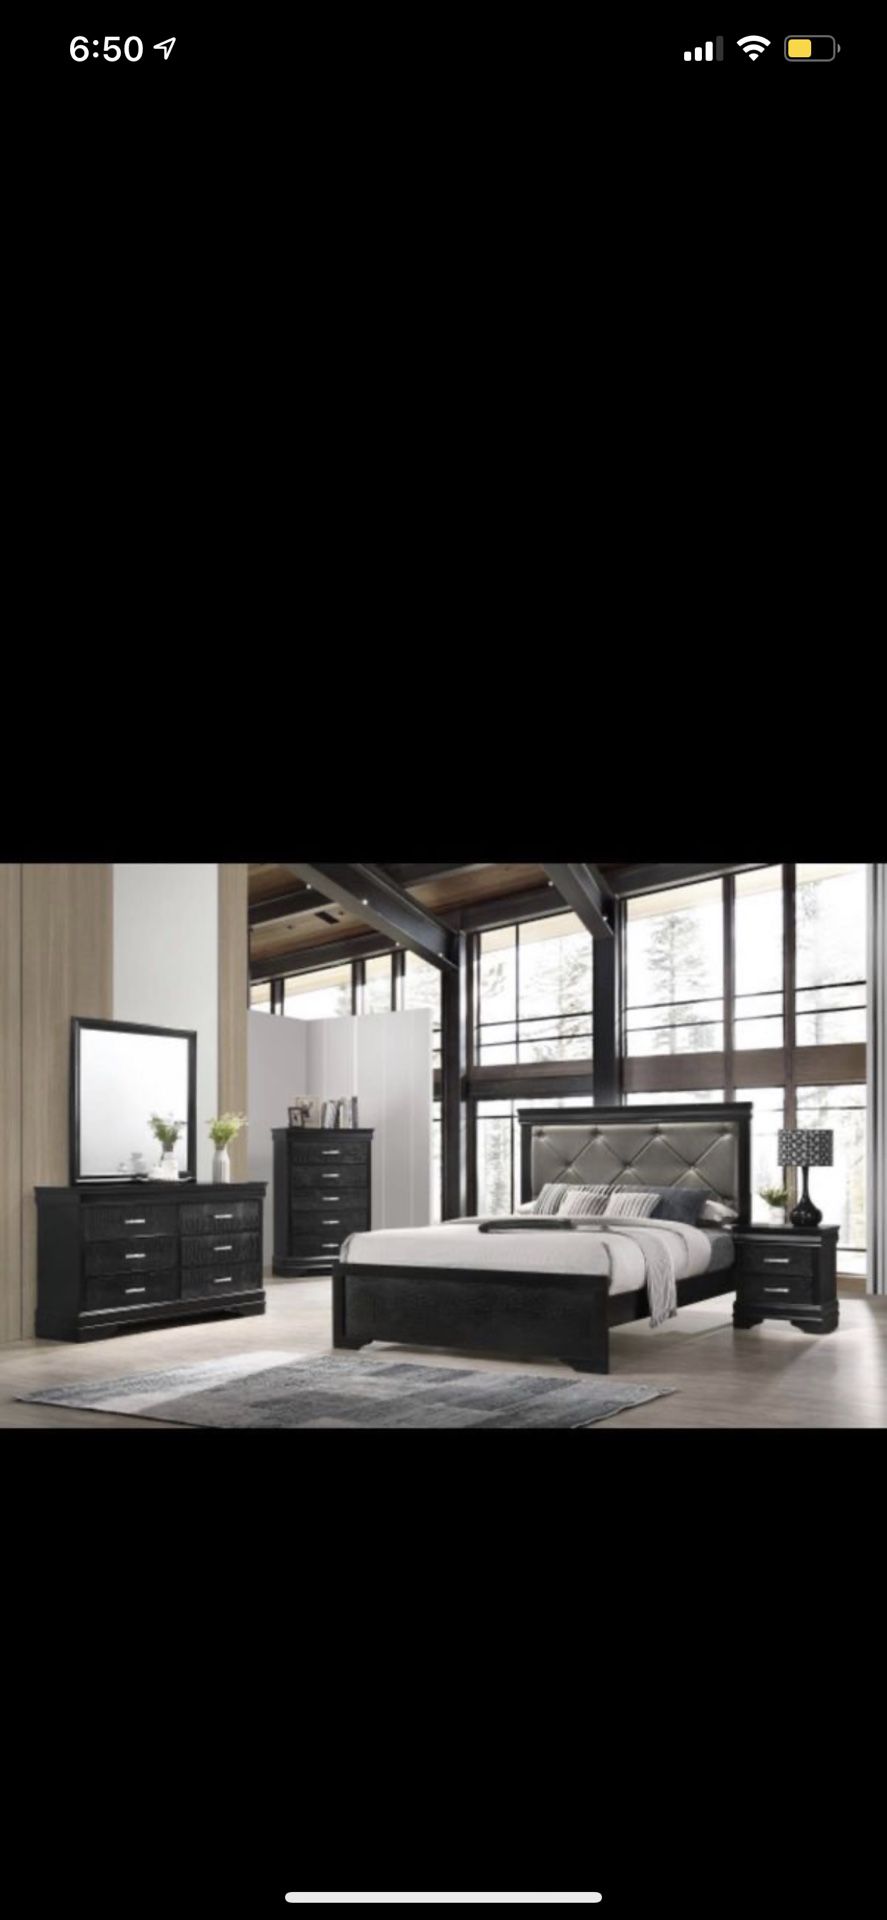 Brand New Complete Bedroom Set With Orthopedic Mattress For $899